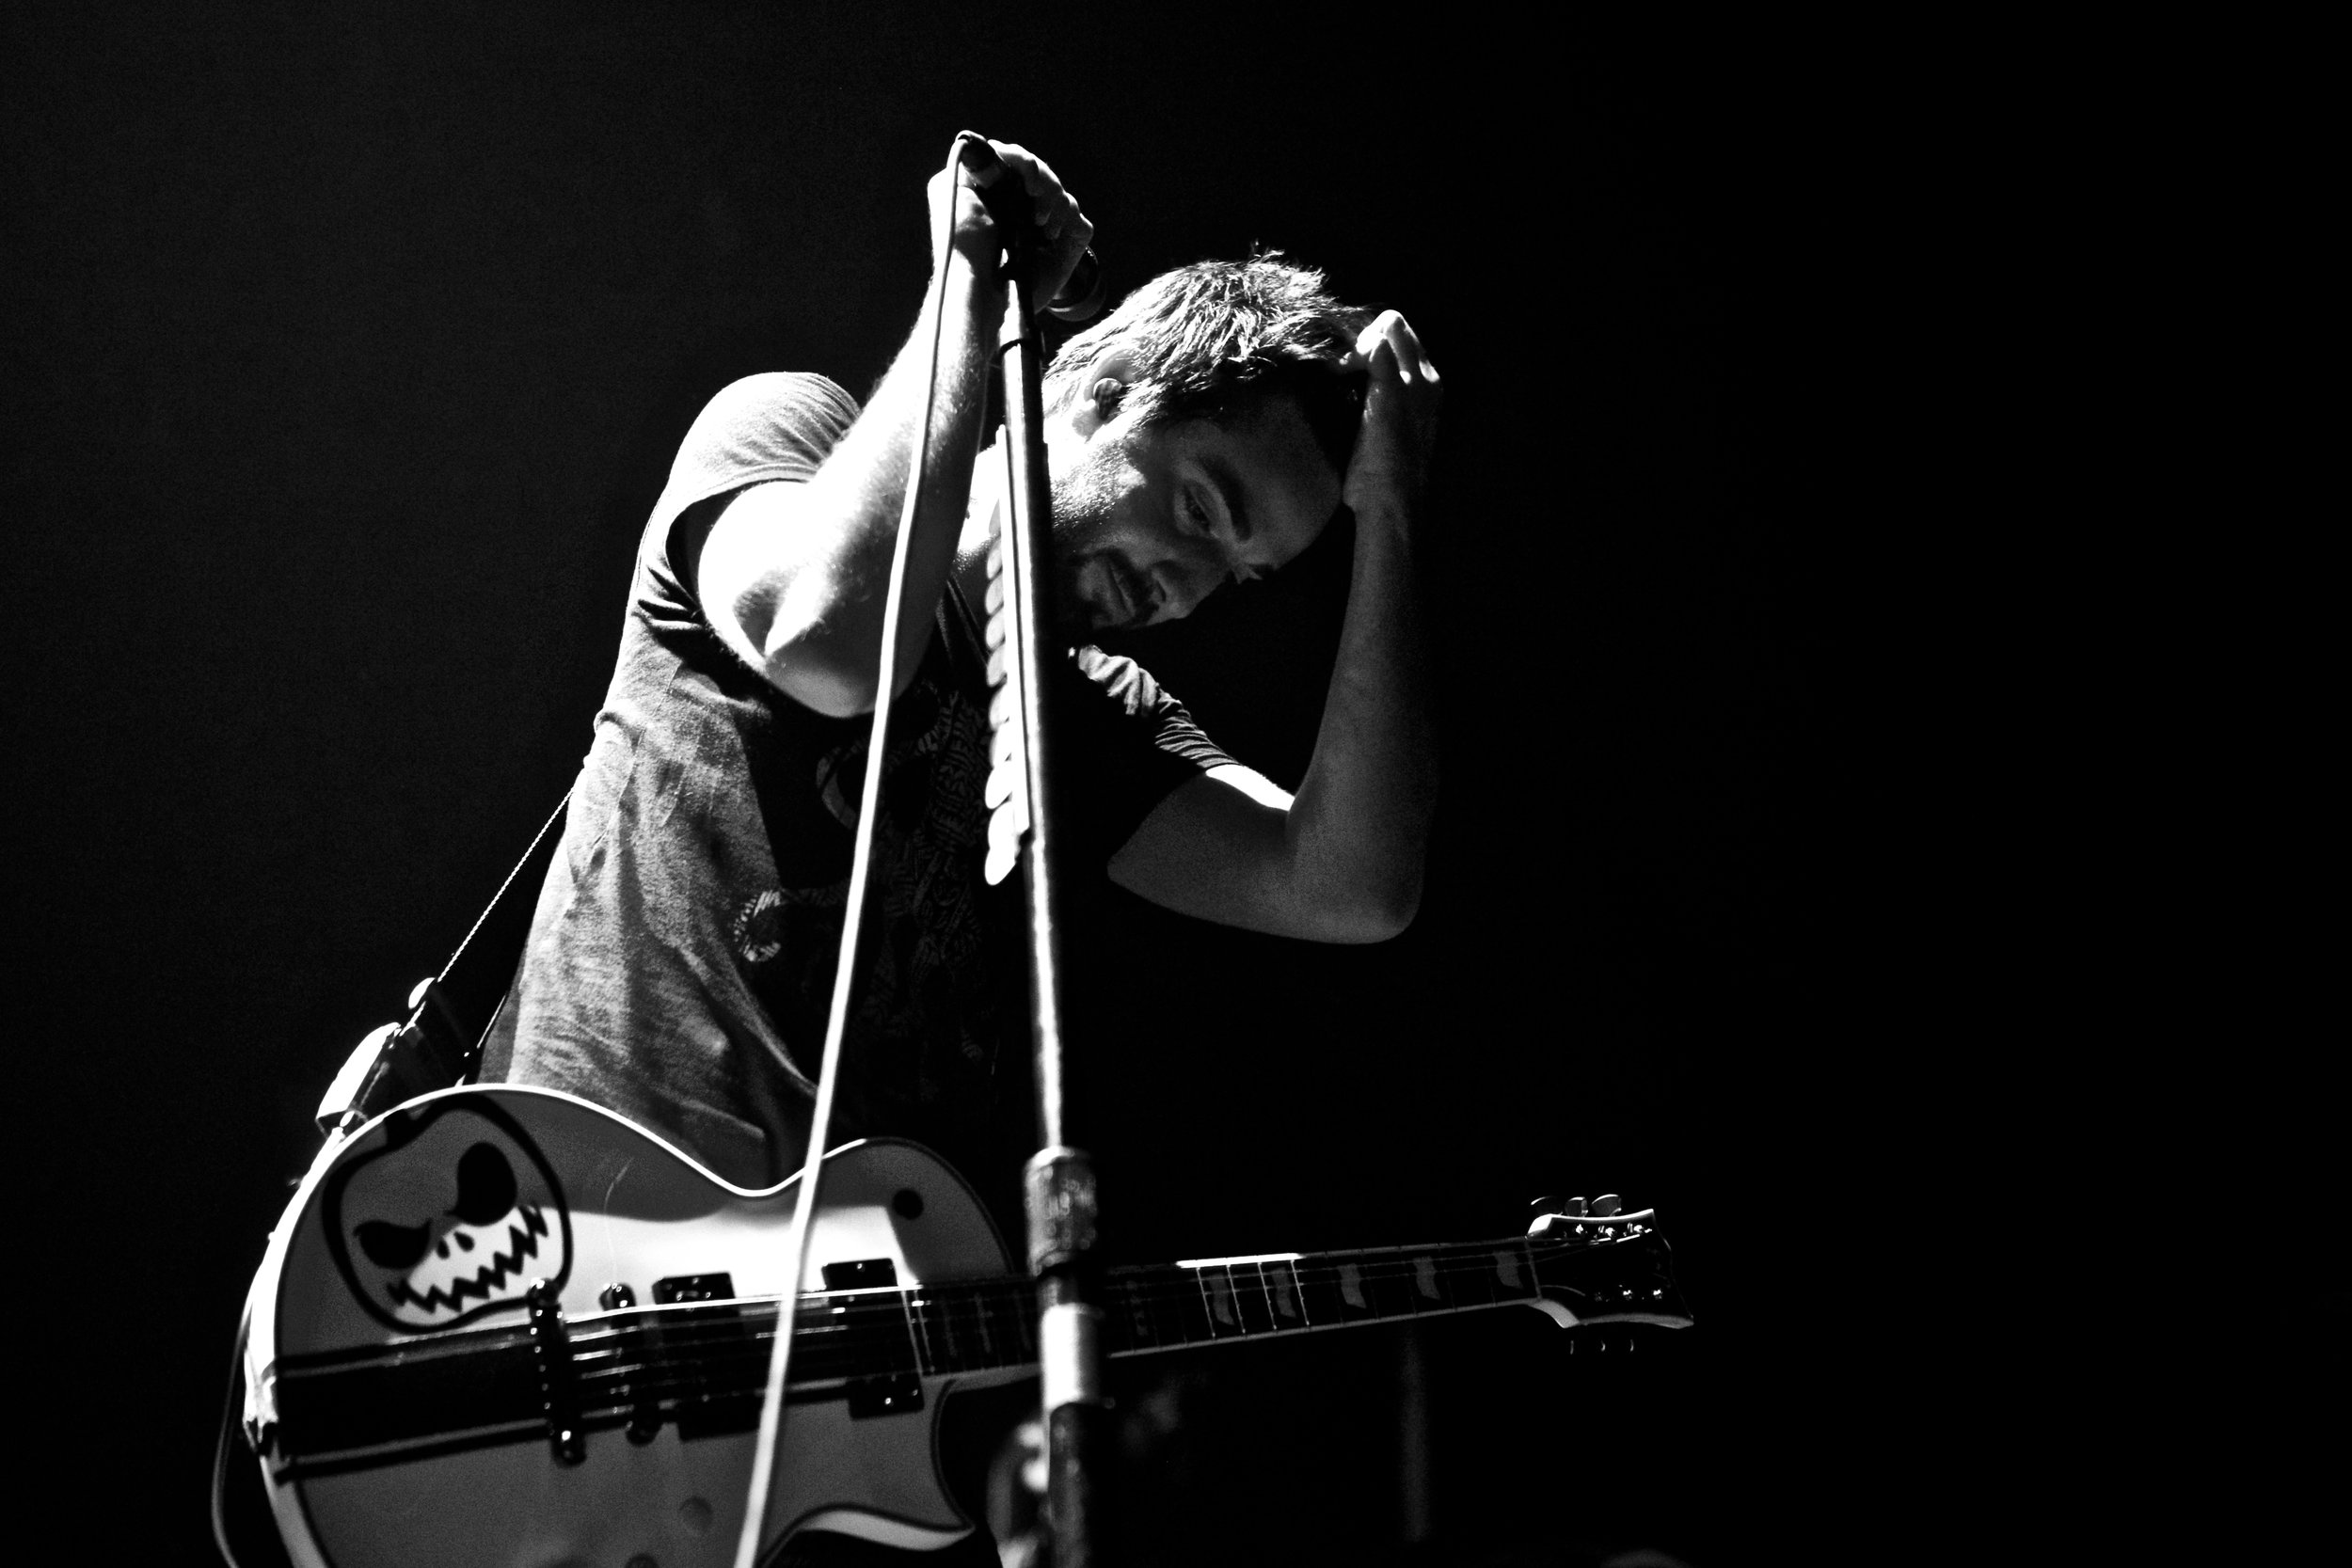  Jack Barakat of All Time Low shot at The Forum 